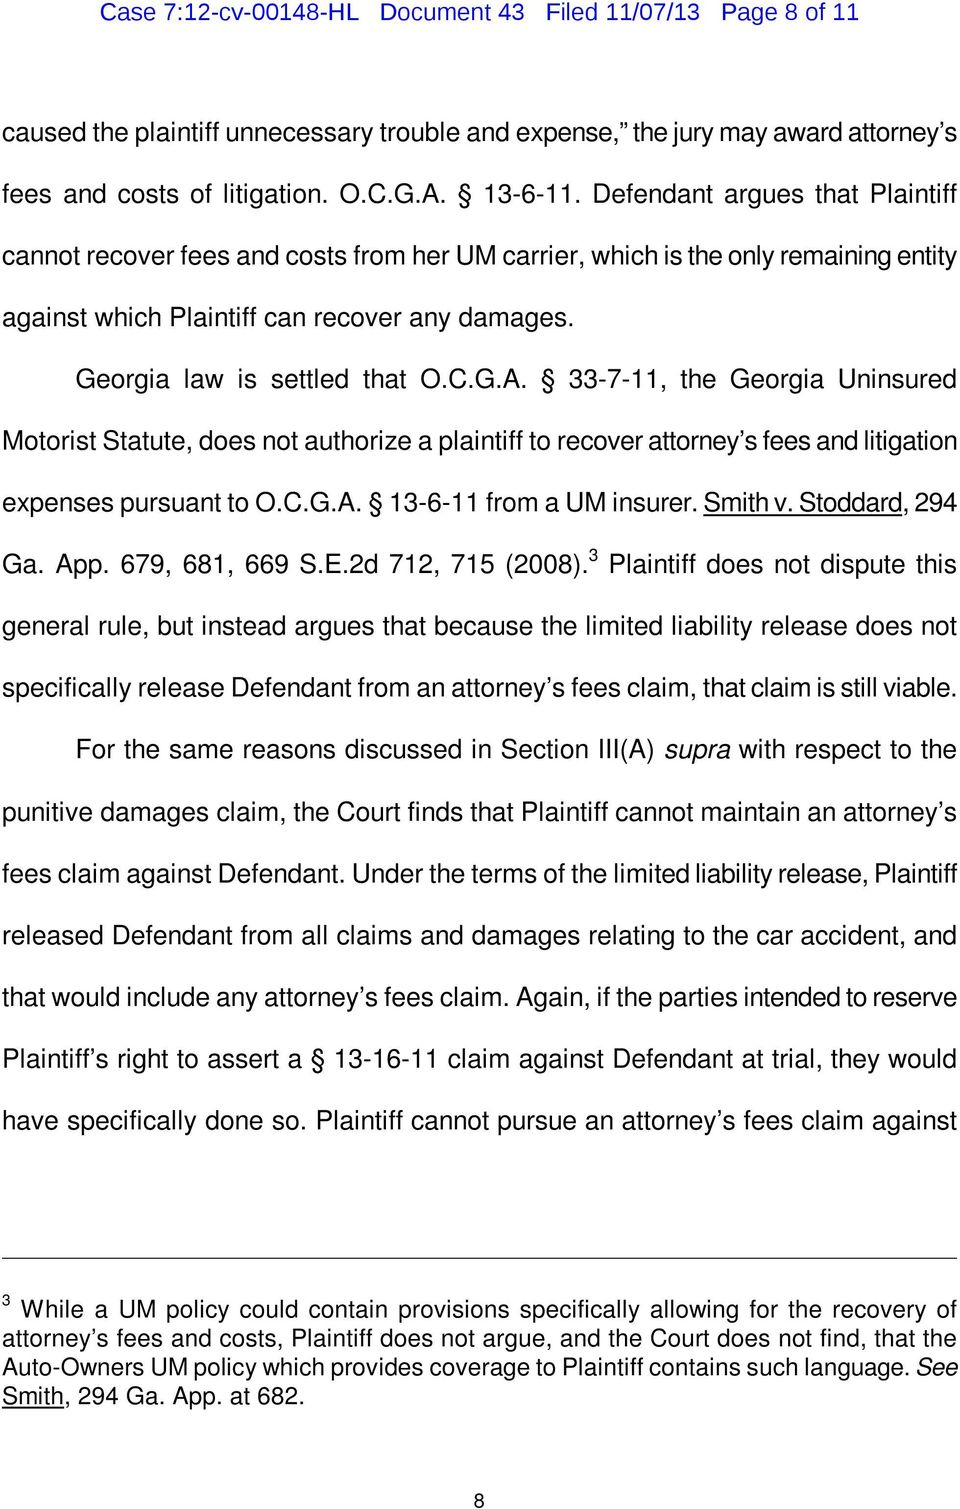 G.A. 33-7-11, the Georgia Uninsured Motorist Statute, does not authorize a plaintiff to recover attorney s fees and litigation expenses pursuant to O.C.G.A. 13-6-11 from a UM insurer. Smith v.